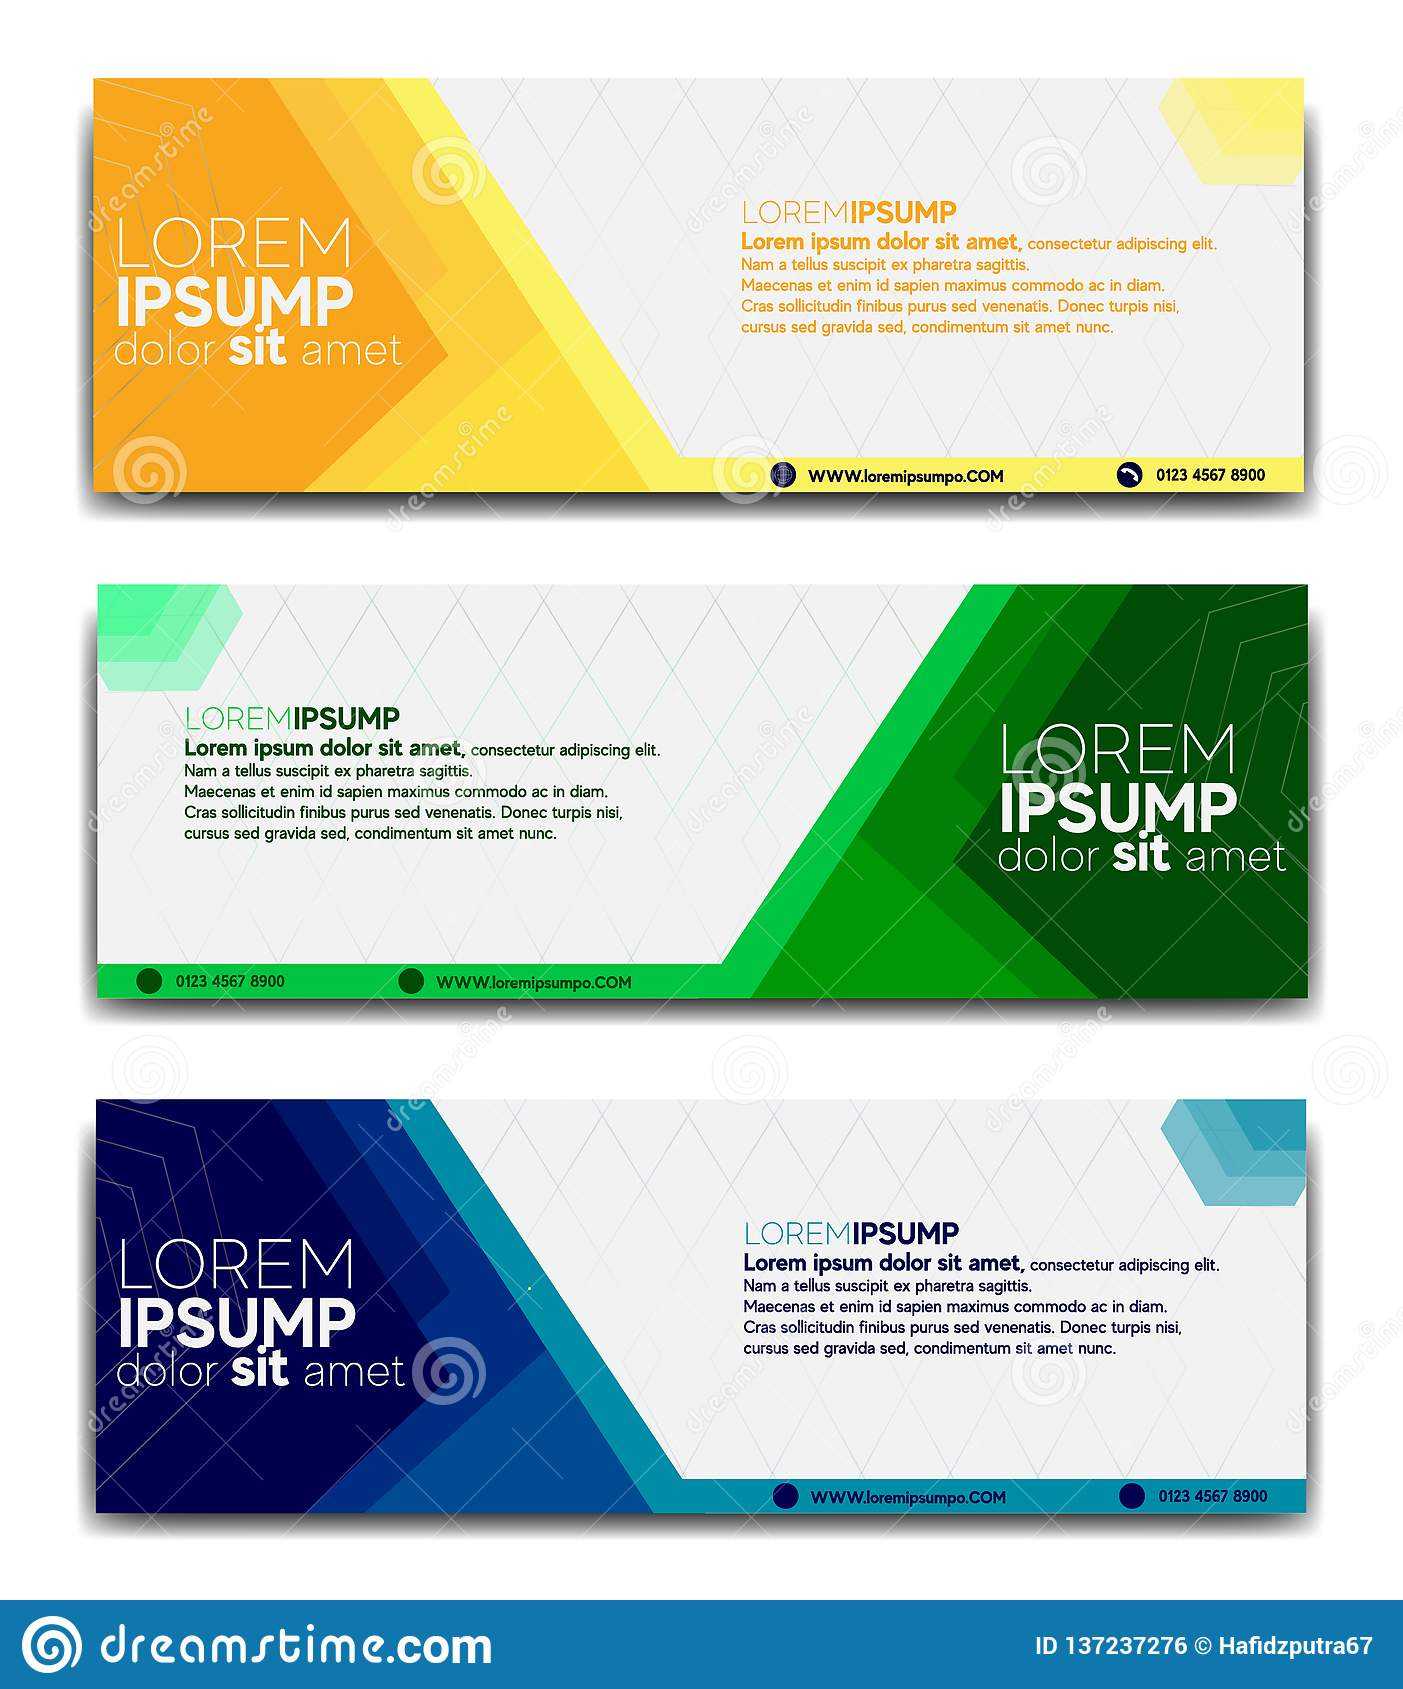 Promotional Banner Design Template 2019 Stock Vector In Website Banner Design Templates